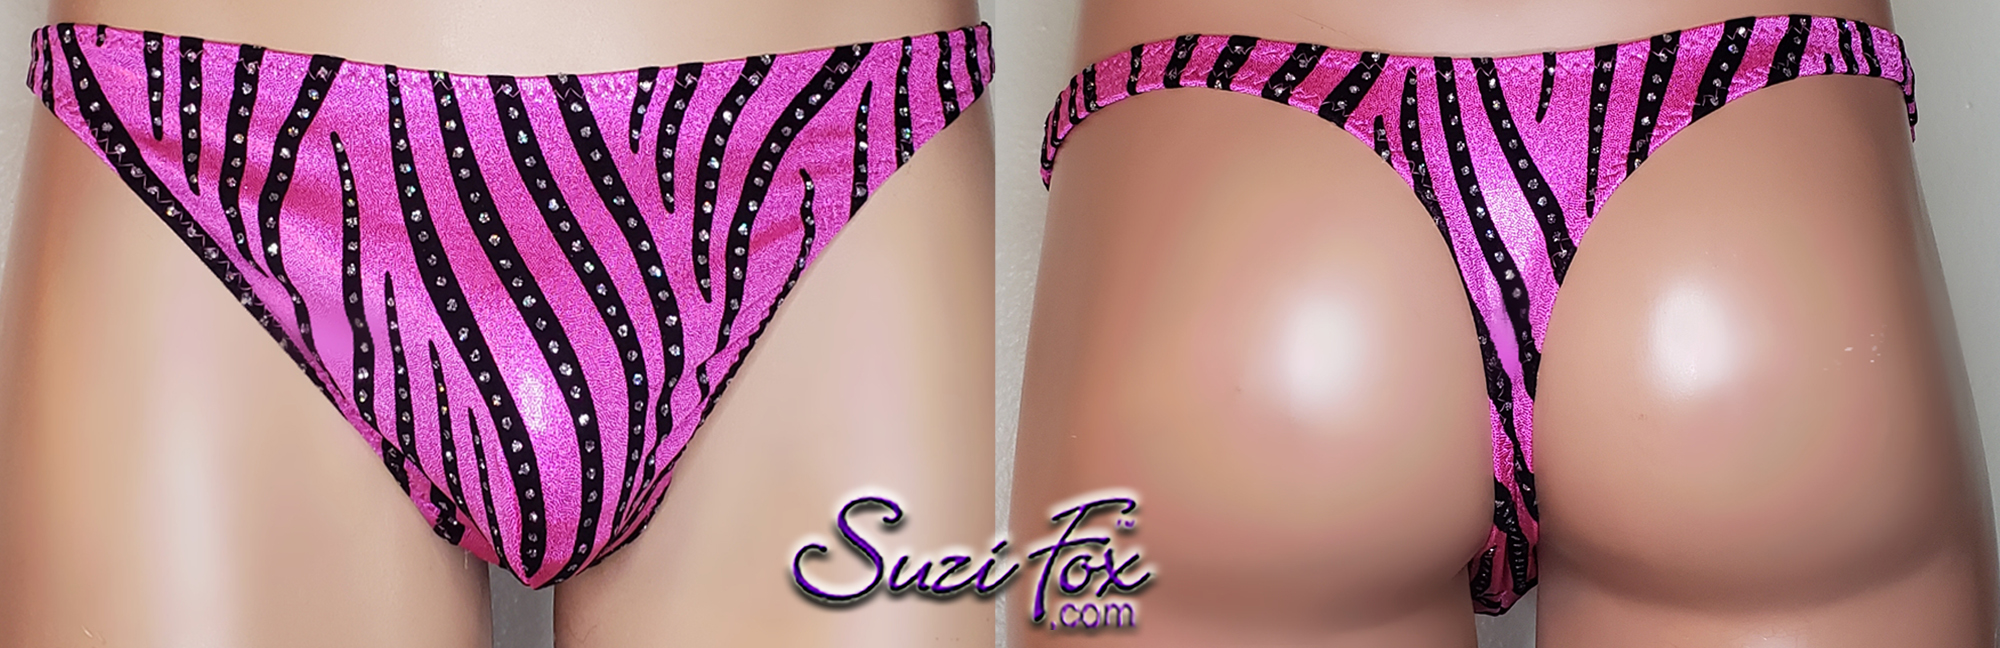 Mens Medium Smooth/Flat Front, Wide Strap, T-back Thong in Hot Pink  Mystique with black stripes and diamonds by Suzi Fox.